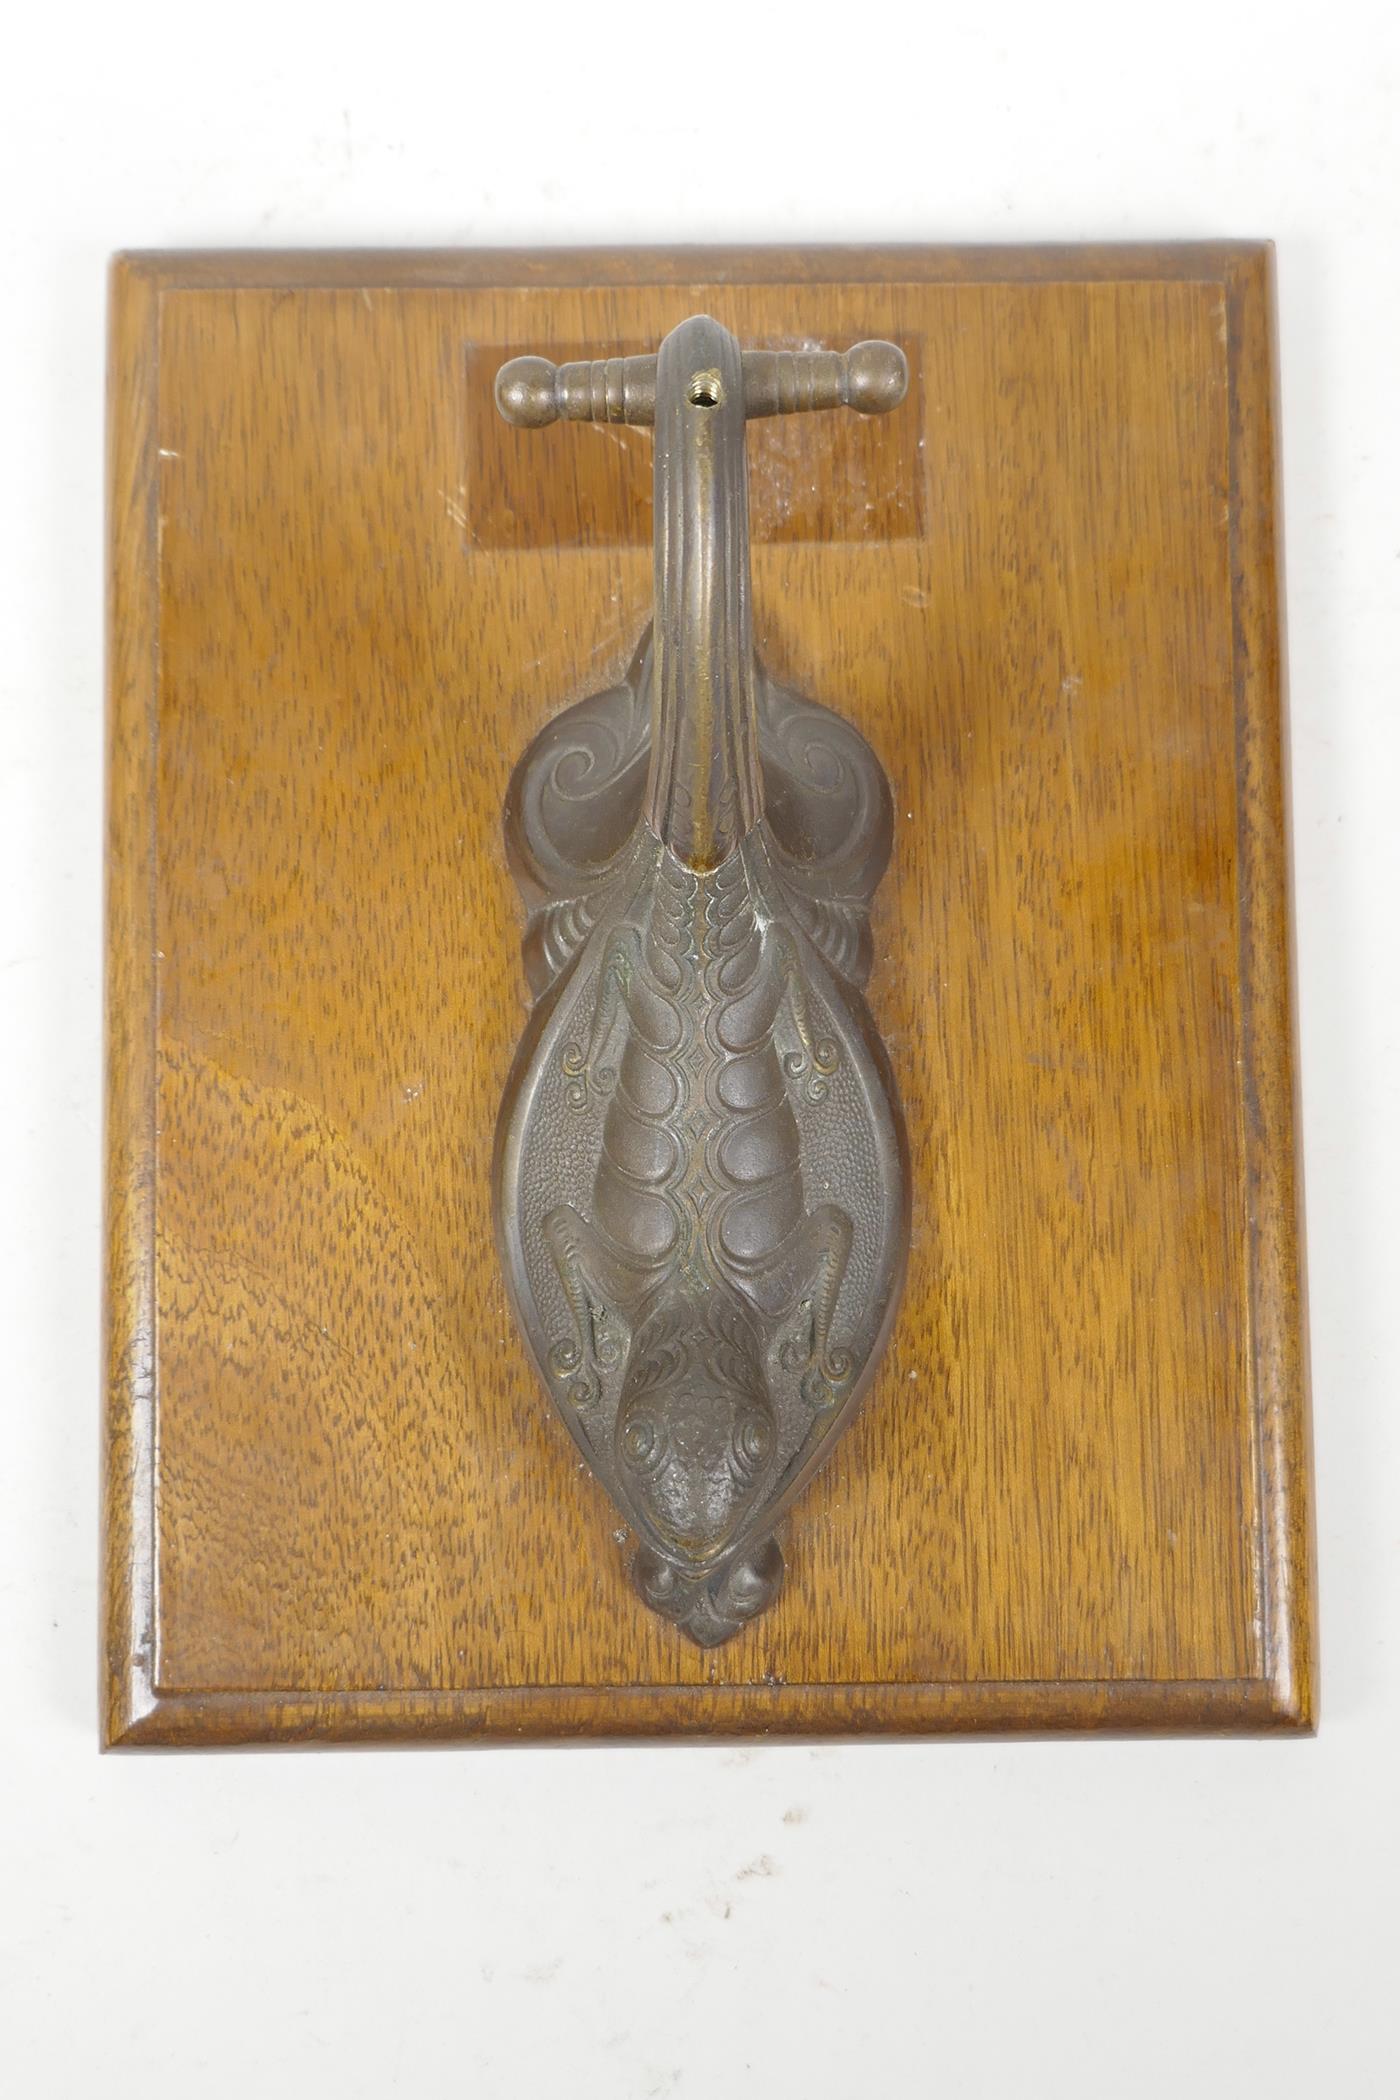 An Art Nouveau wall hook in the form of a gekko, 8" x 10" - Image 2 of 3